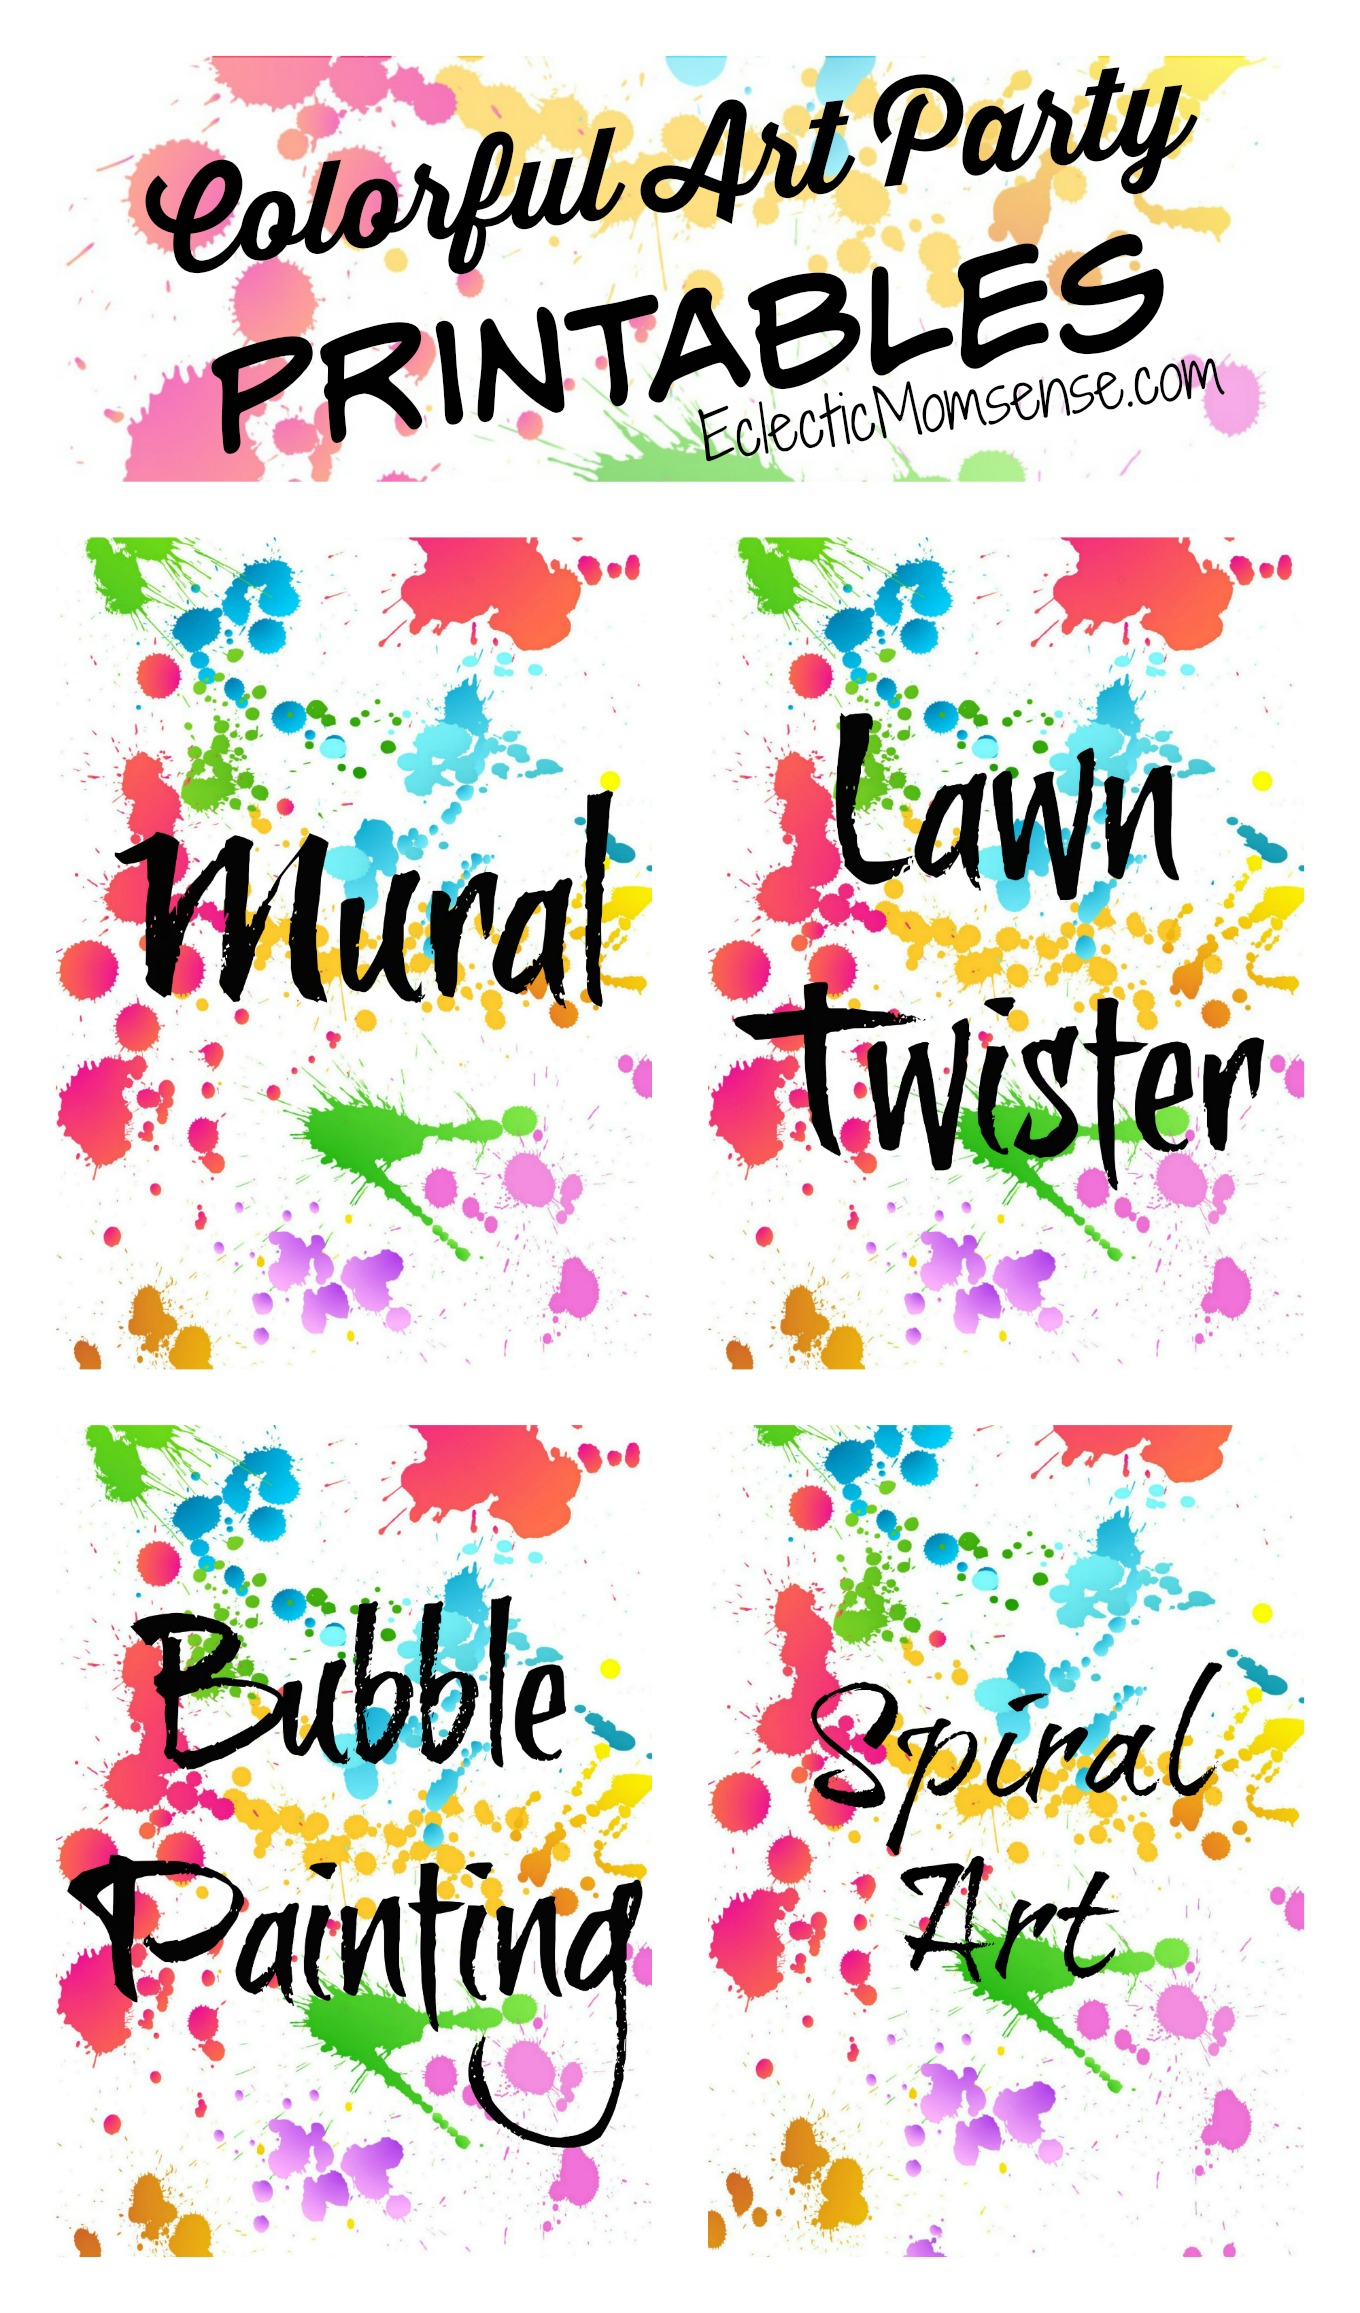 colorful-art-party-printables-eclectic-momsense